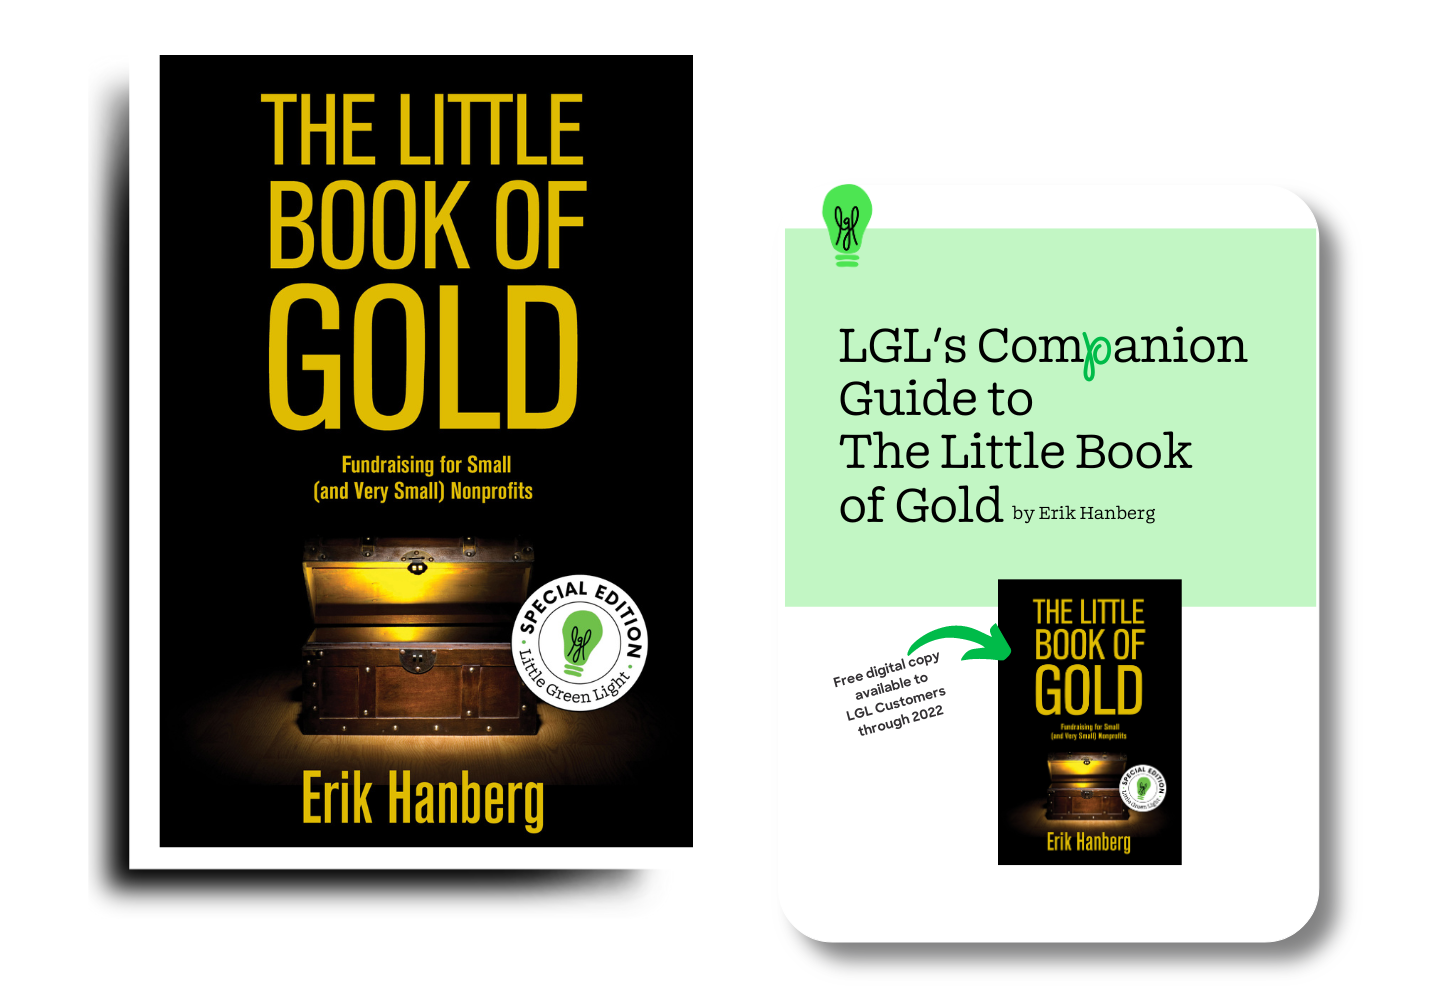 Little Book of Gold and LGL Companion Guide